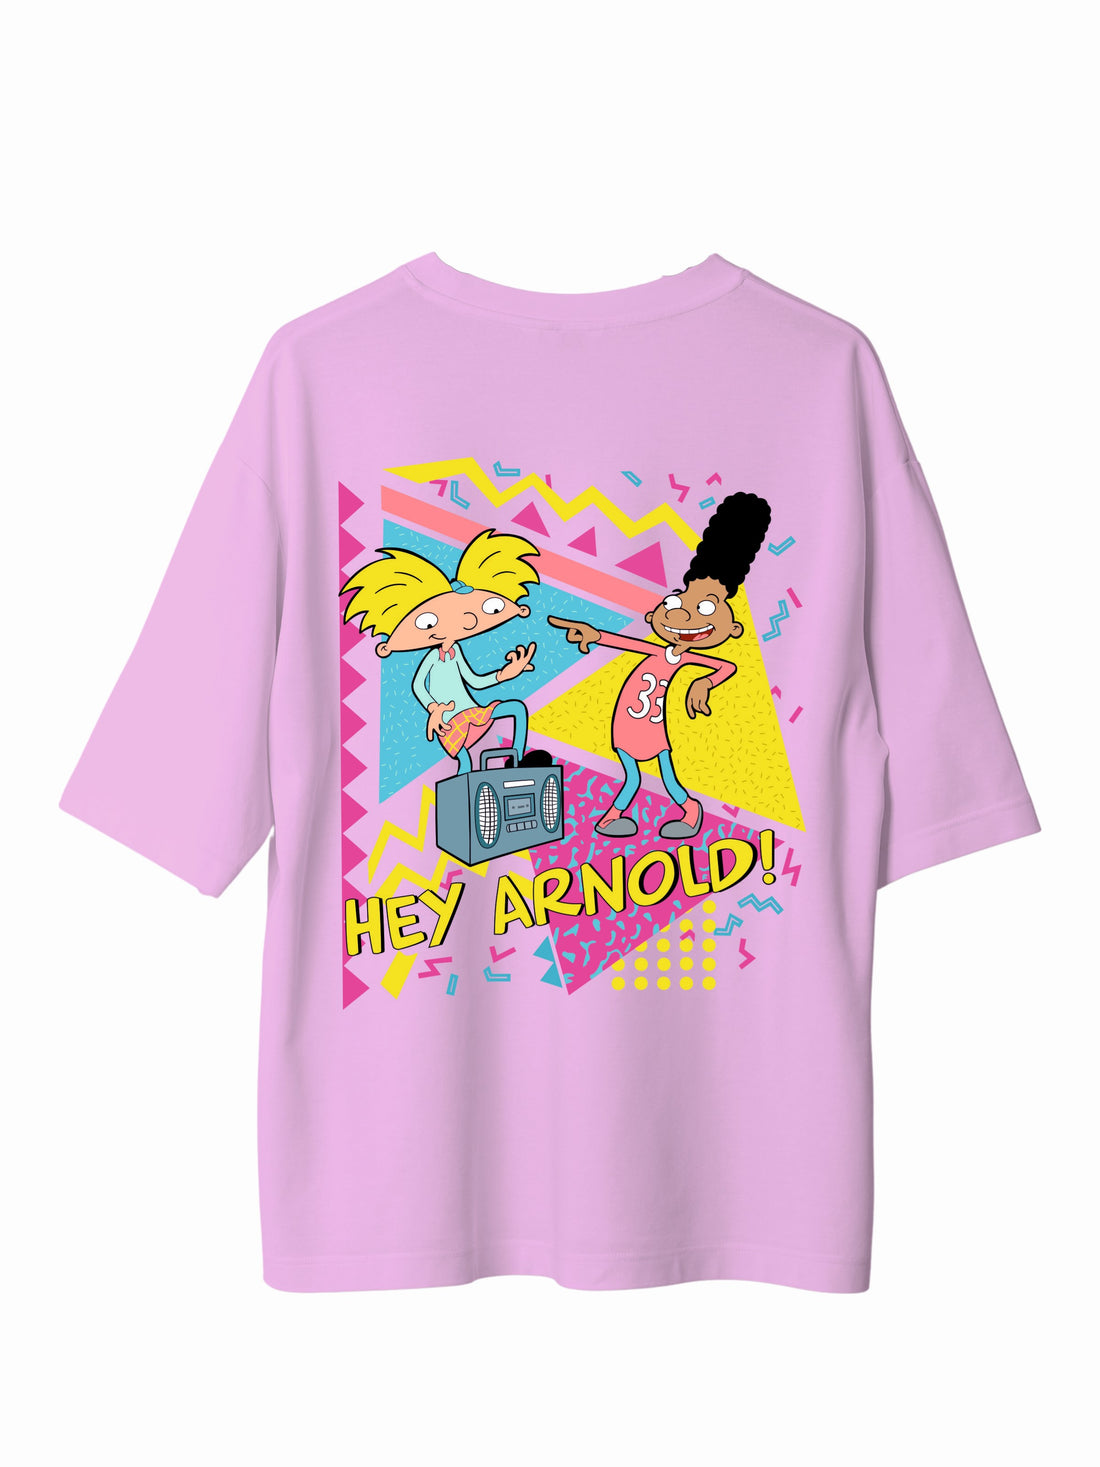 Hey Arnold - Burger Bae Oversized  Tee For Men and Women